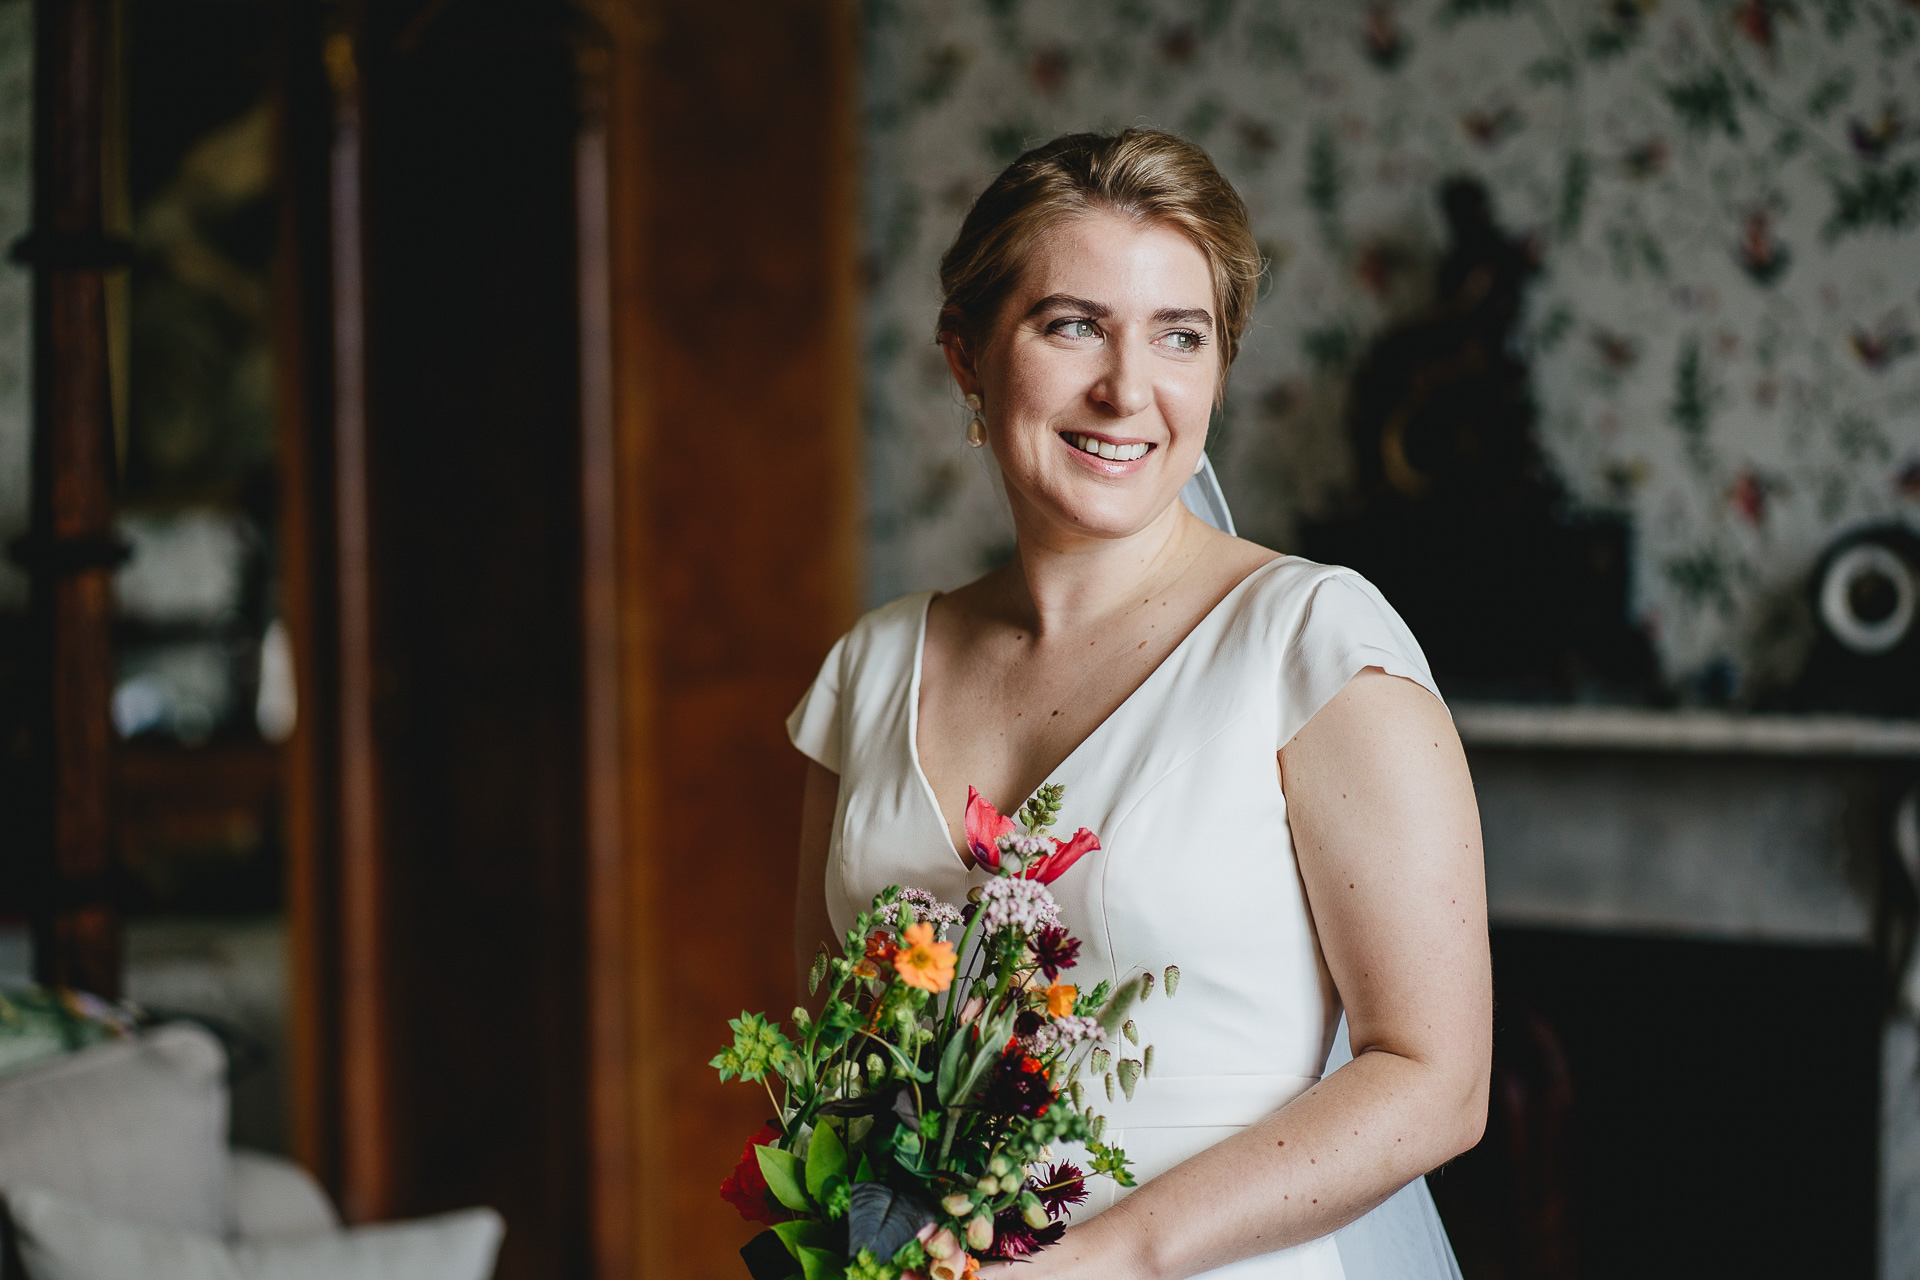 Bride with bouquet smiling in window light